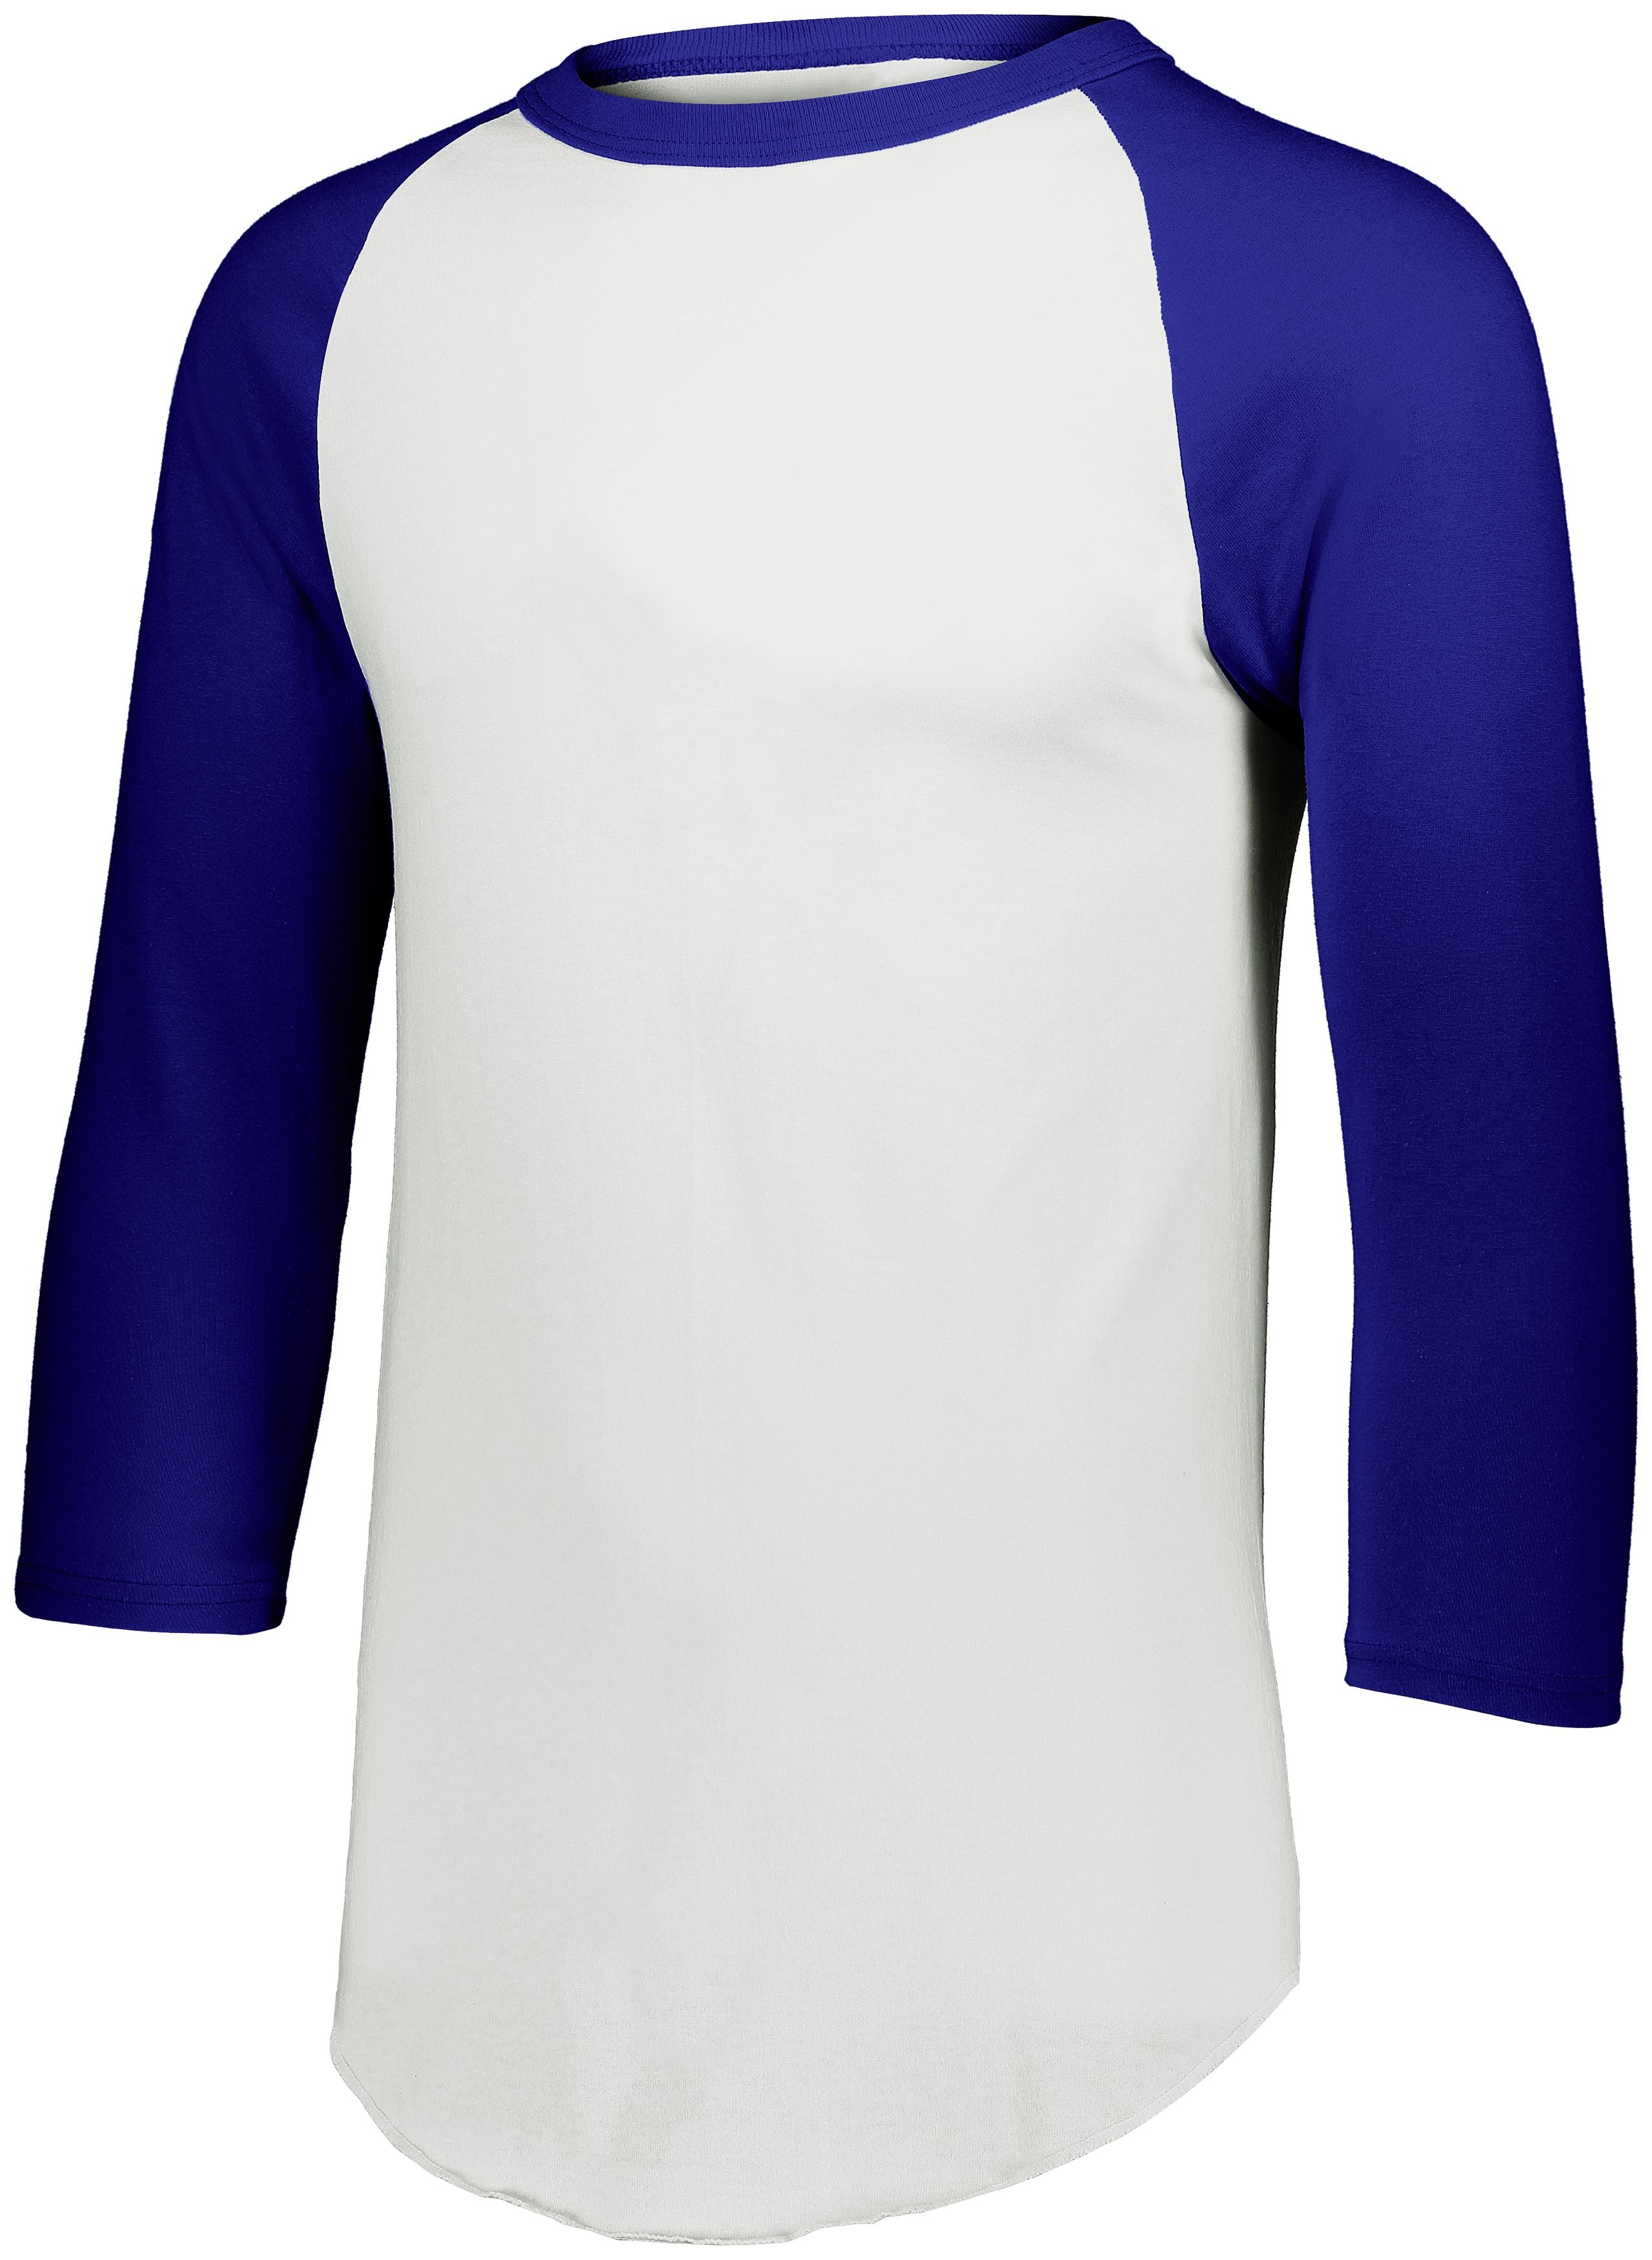 Augusta Sportswear Youth Baseball Jersey 2.0 in White/Purple  -Part of the Youth, Youth-Jersey, Augusta-Products, Baseball, Shirts, All-Sports, All-Sports-1 product lines at KanaleyCreations.com